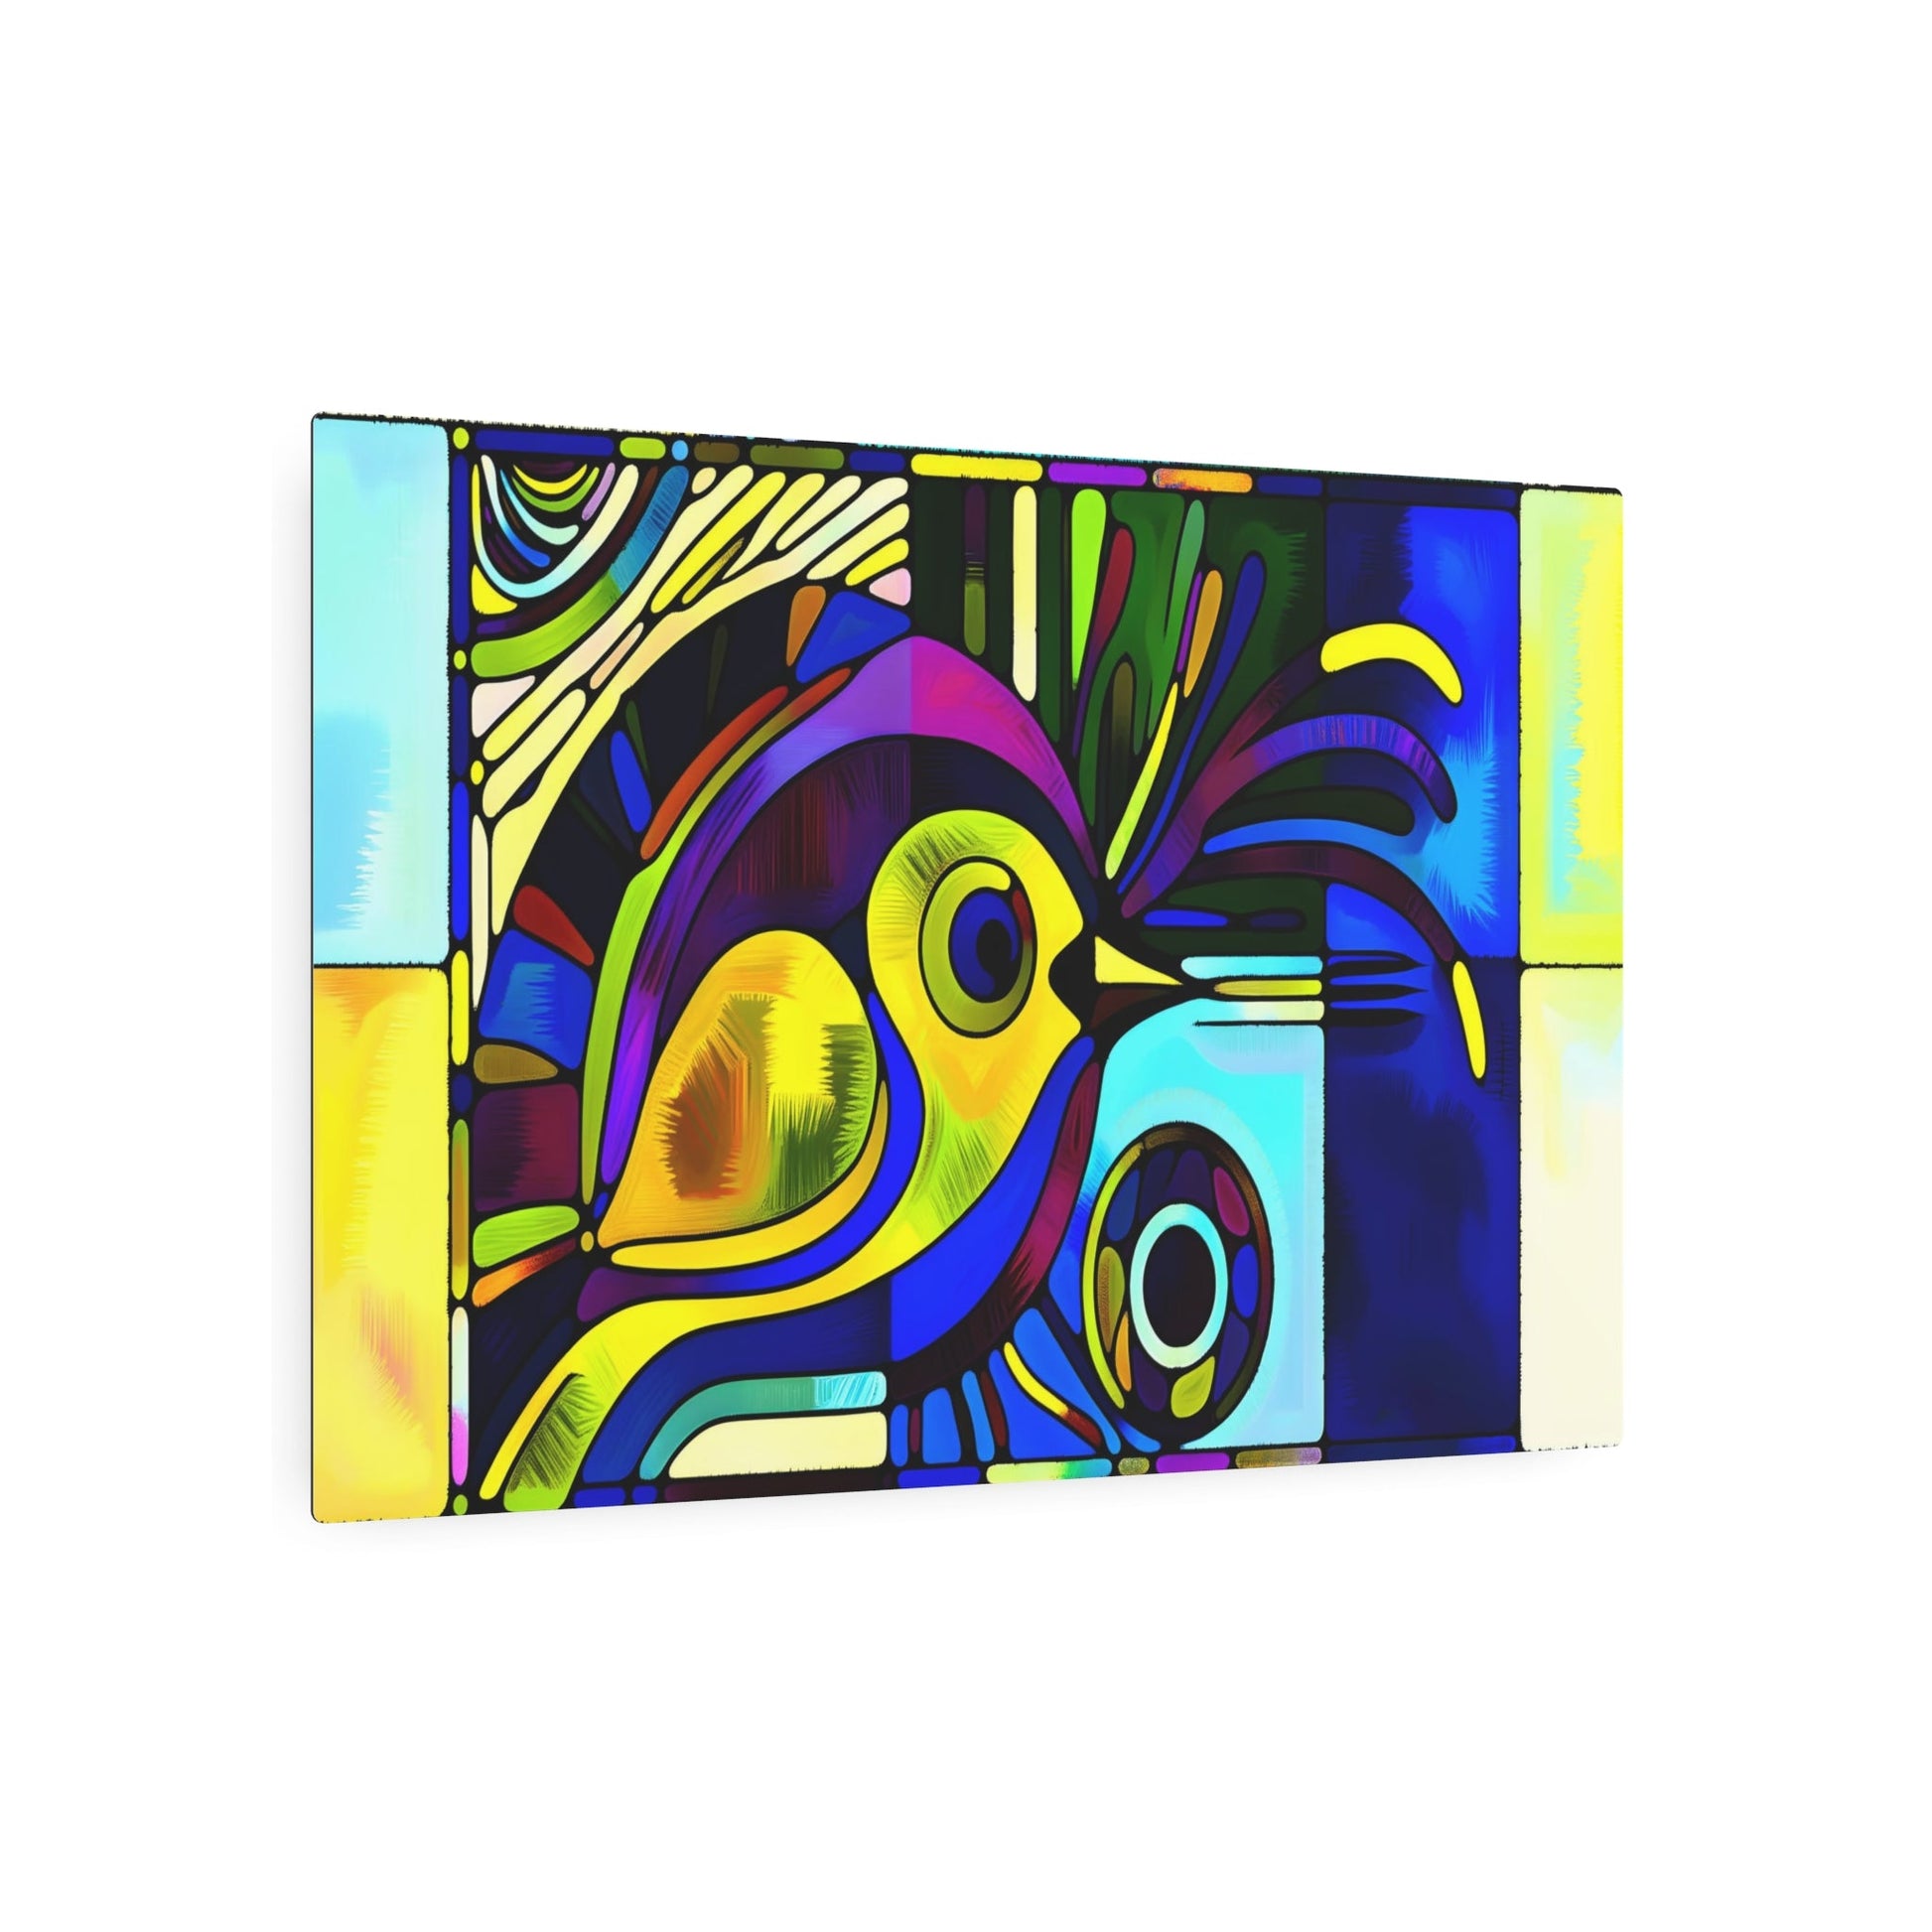 Metal Poster Art | "Modern & Contemporary Pop Art - Vibrant Colored Bird with Bold Outlines - Iconic Style Wall Decor" - Metal Poster Art 36″ x 24″ (Horizontal) 0.12''